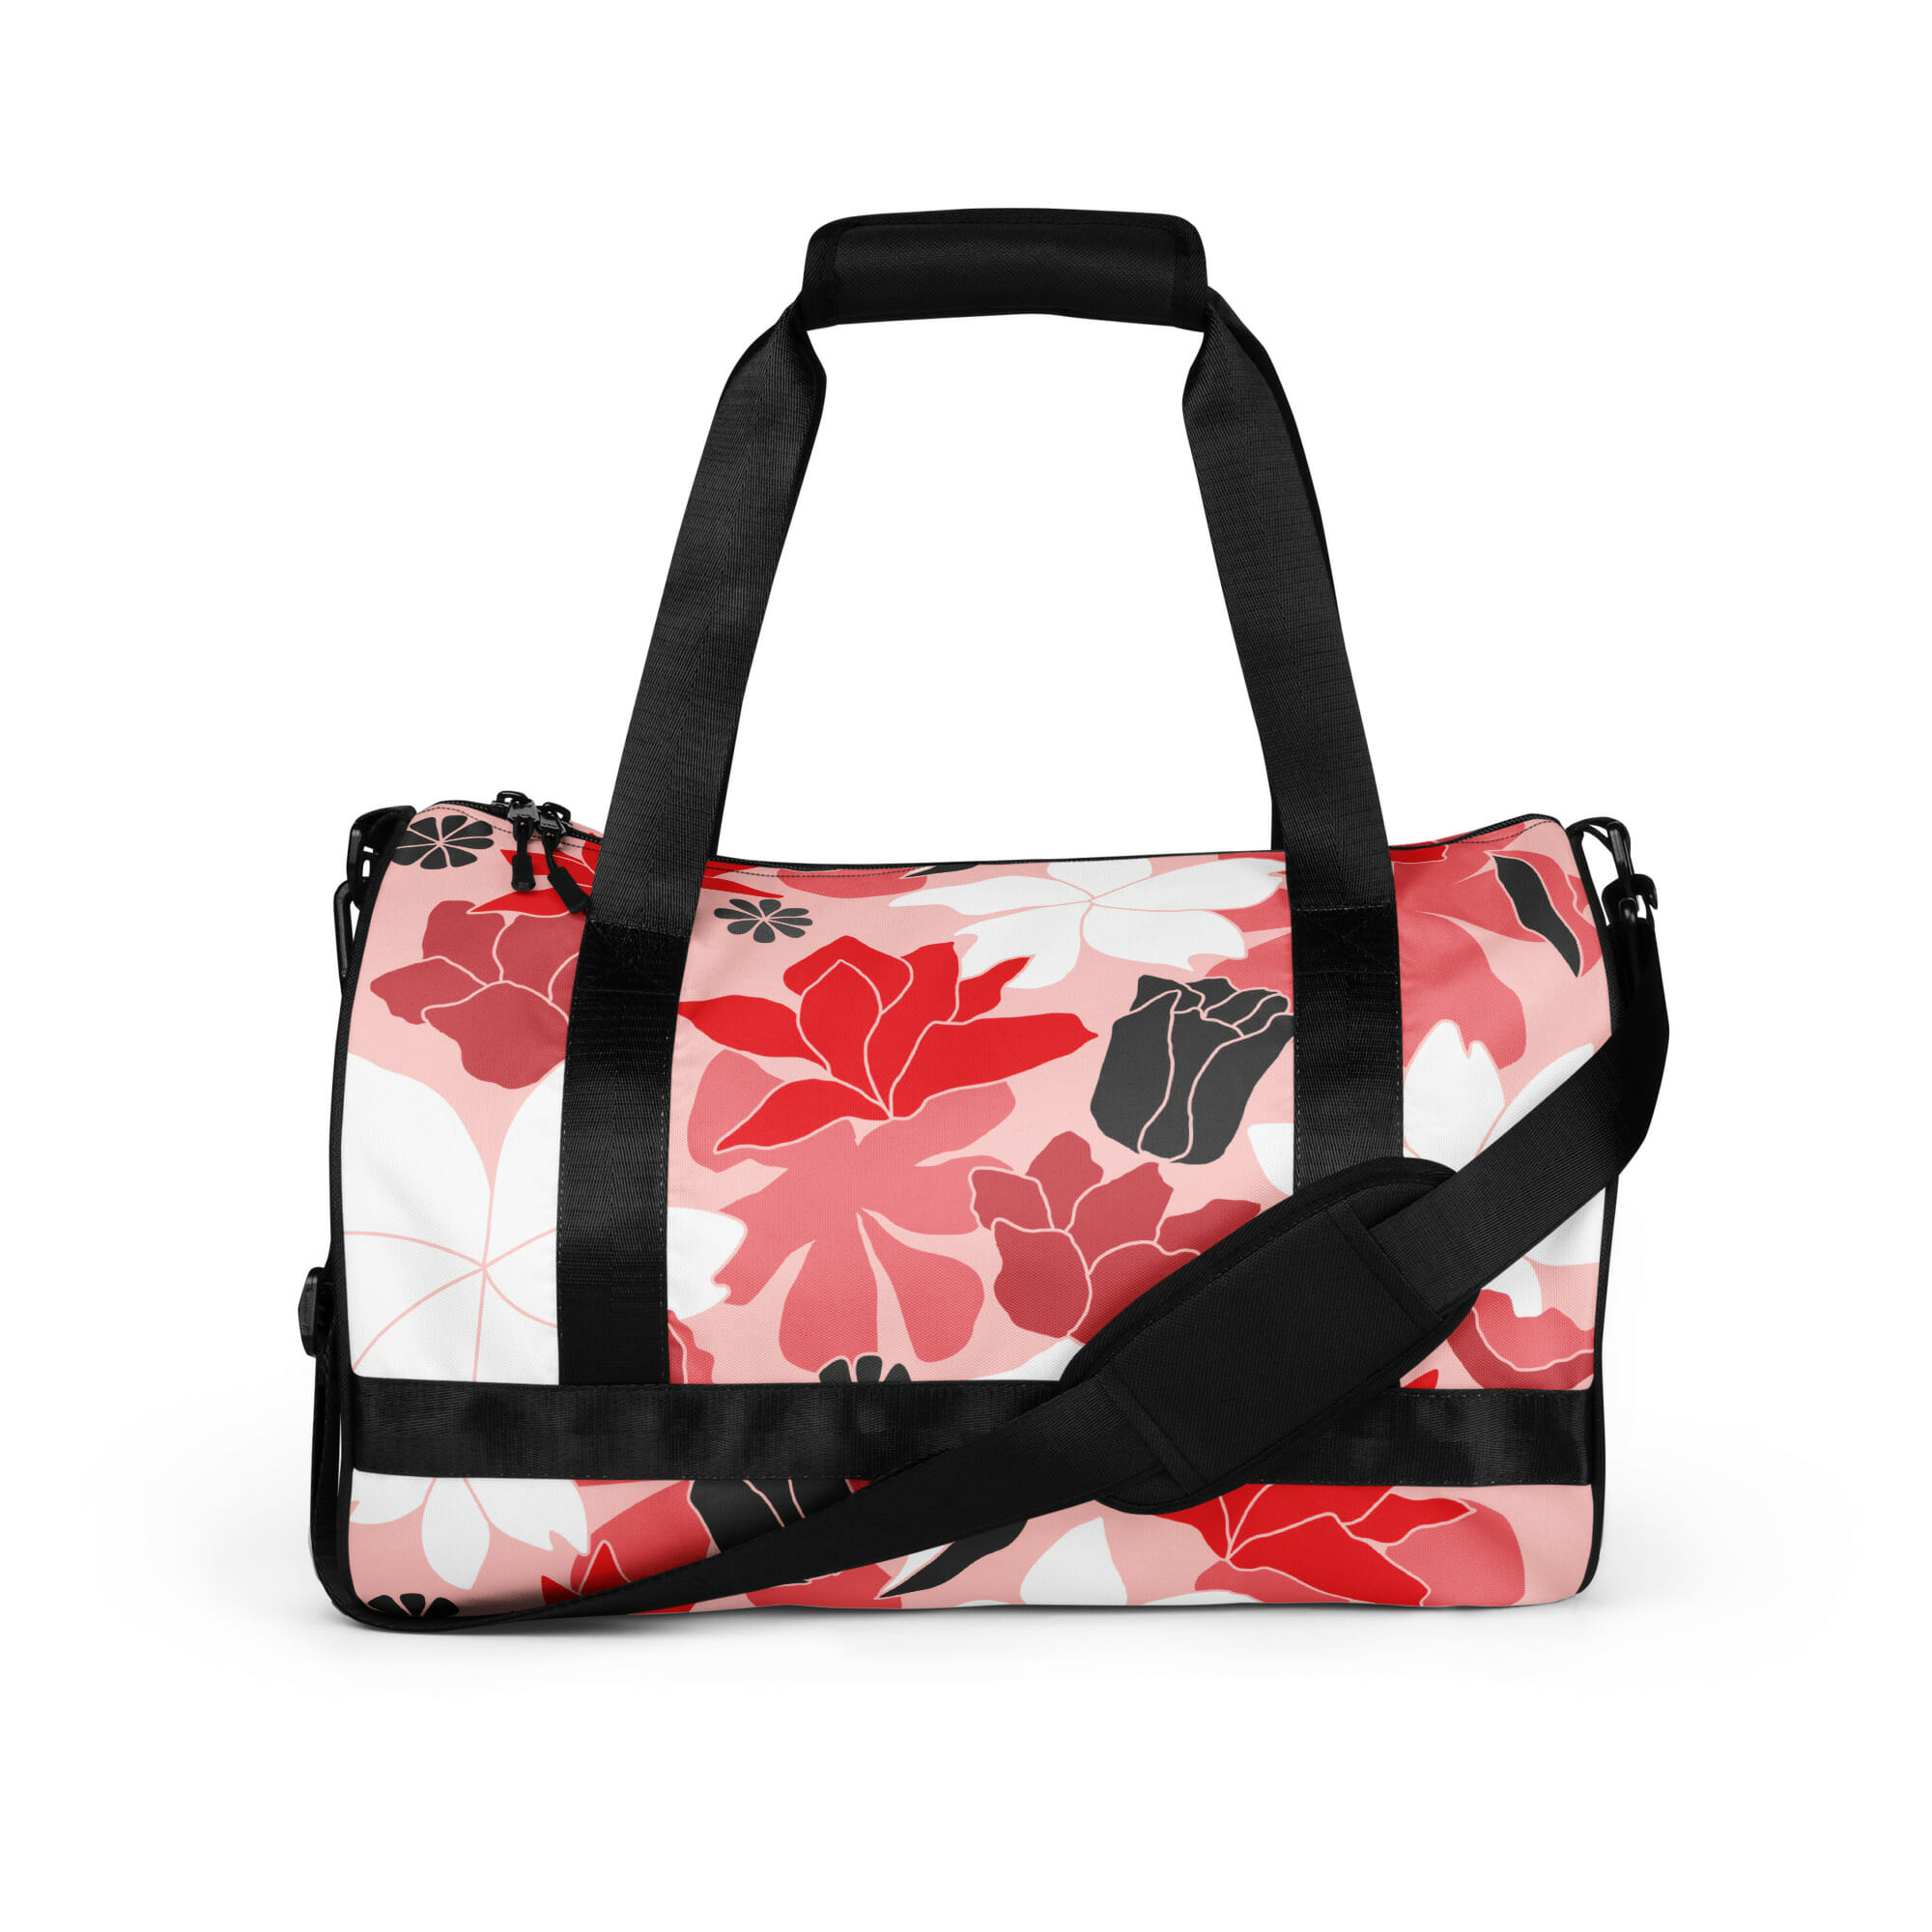 all-over-print-gym-bag-white-front-642f21885be20.jpg